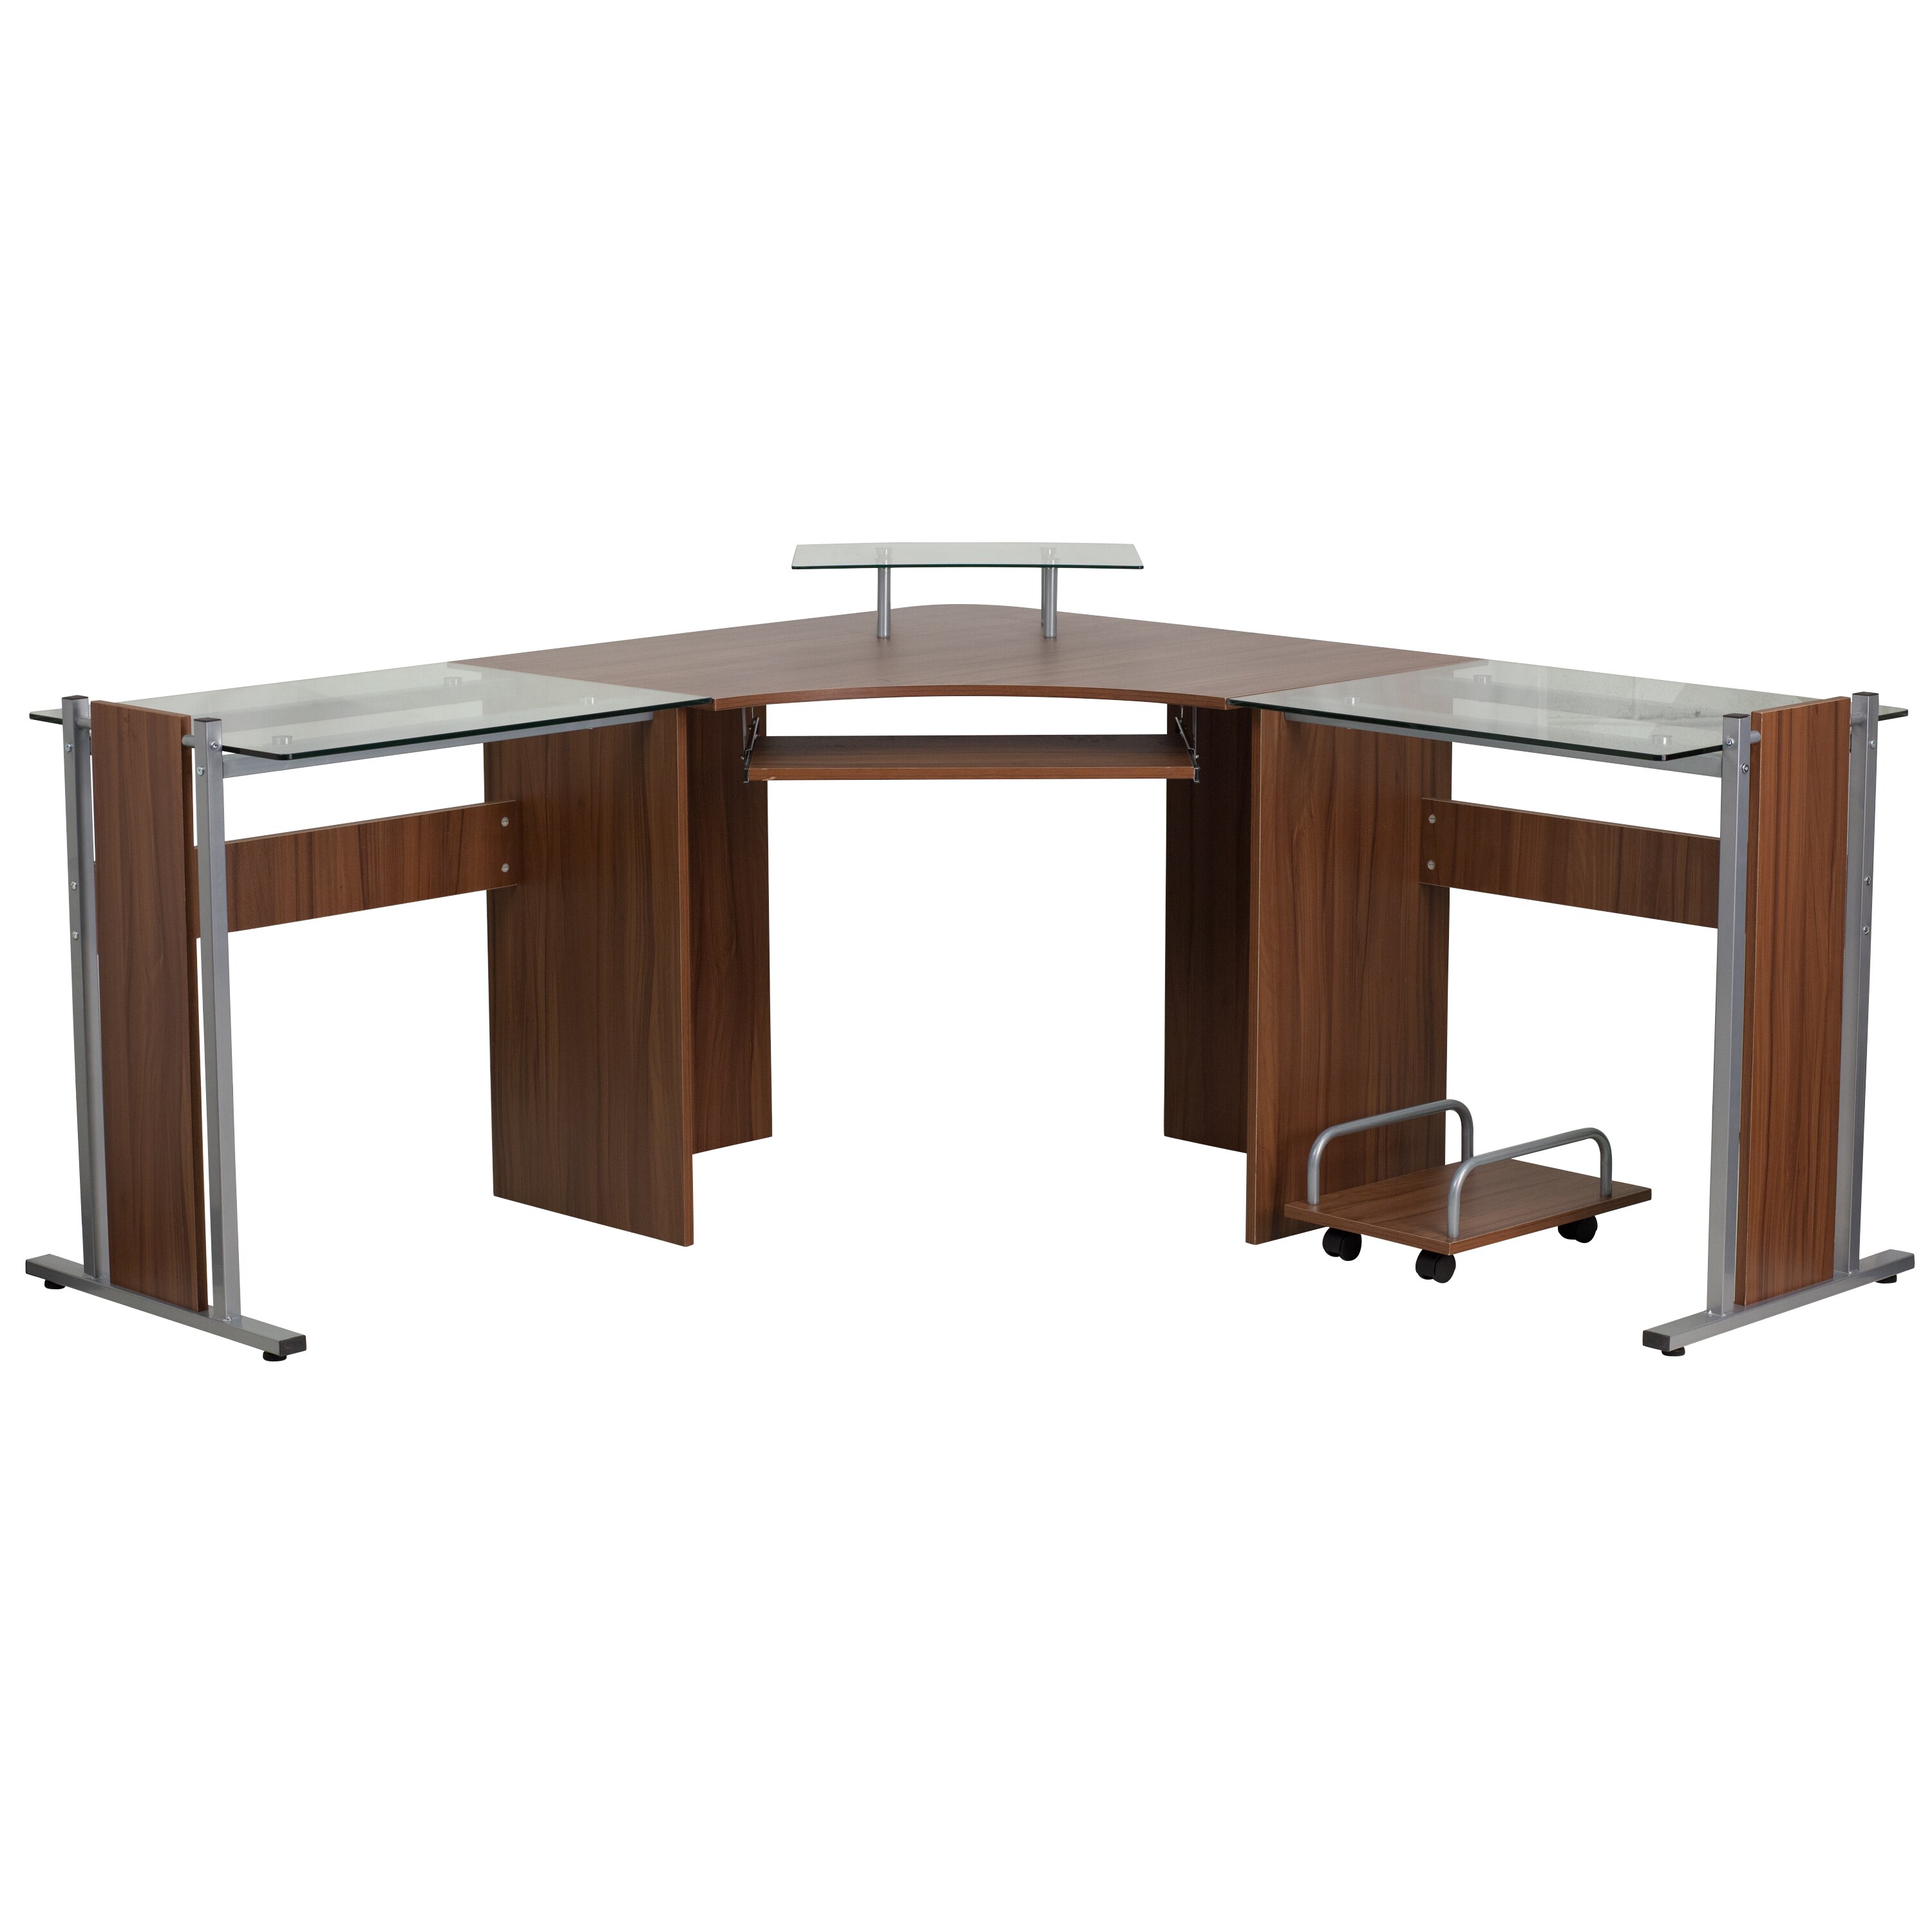 Shop Rald Silver And Brown Wood And Glass Corner Desk Overstock